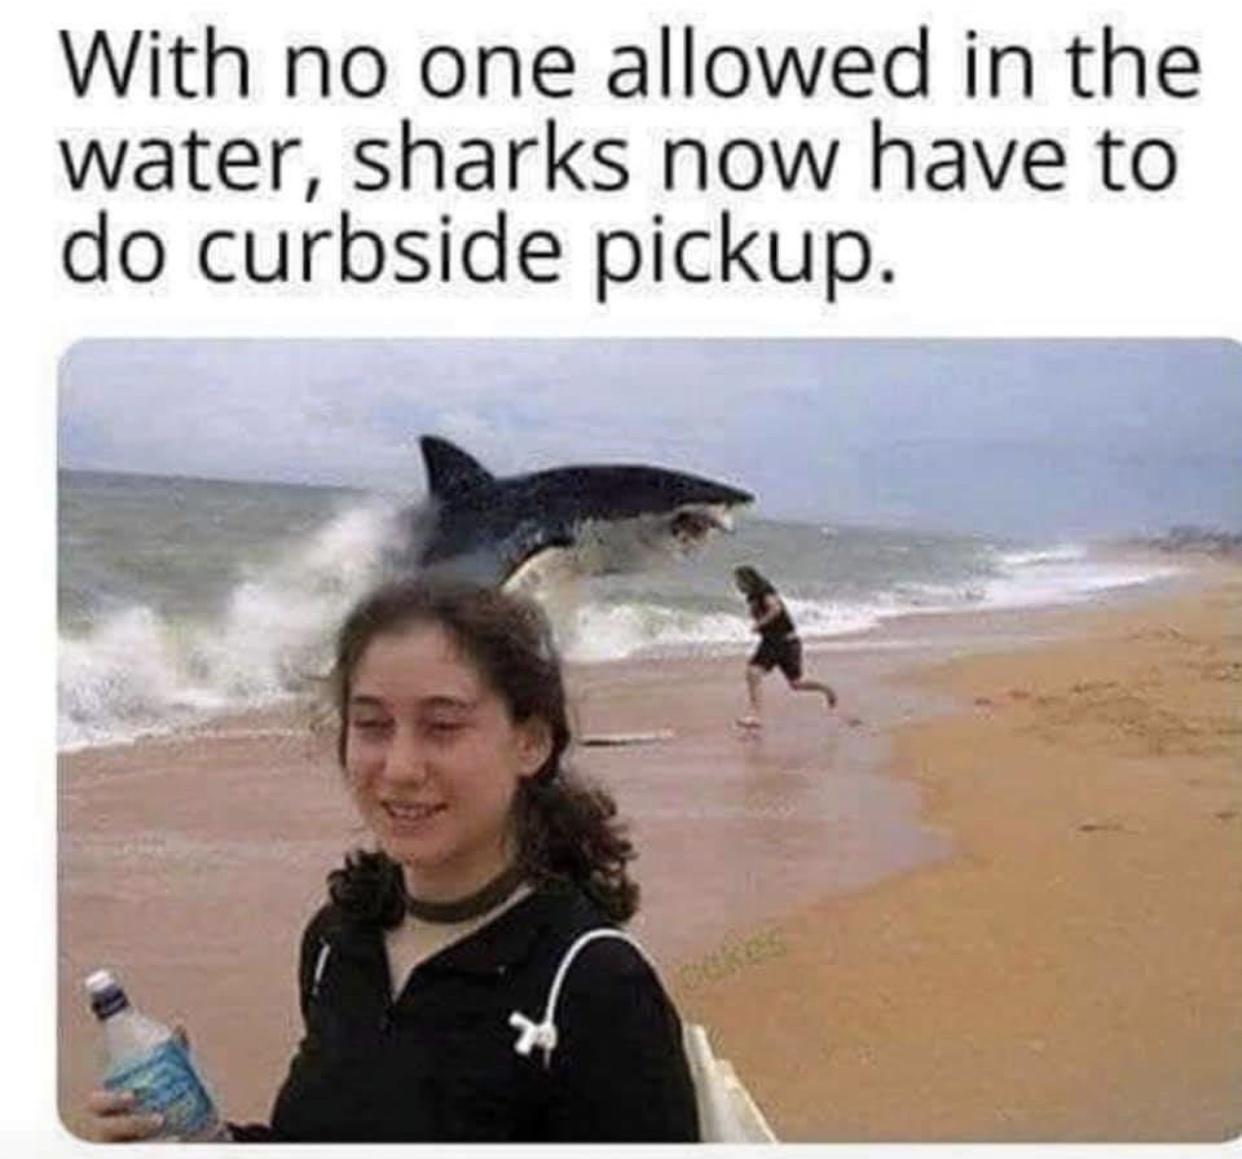 shark curbside meme - With no one allowed in the water, sharks now have to do curbside pickup. Res